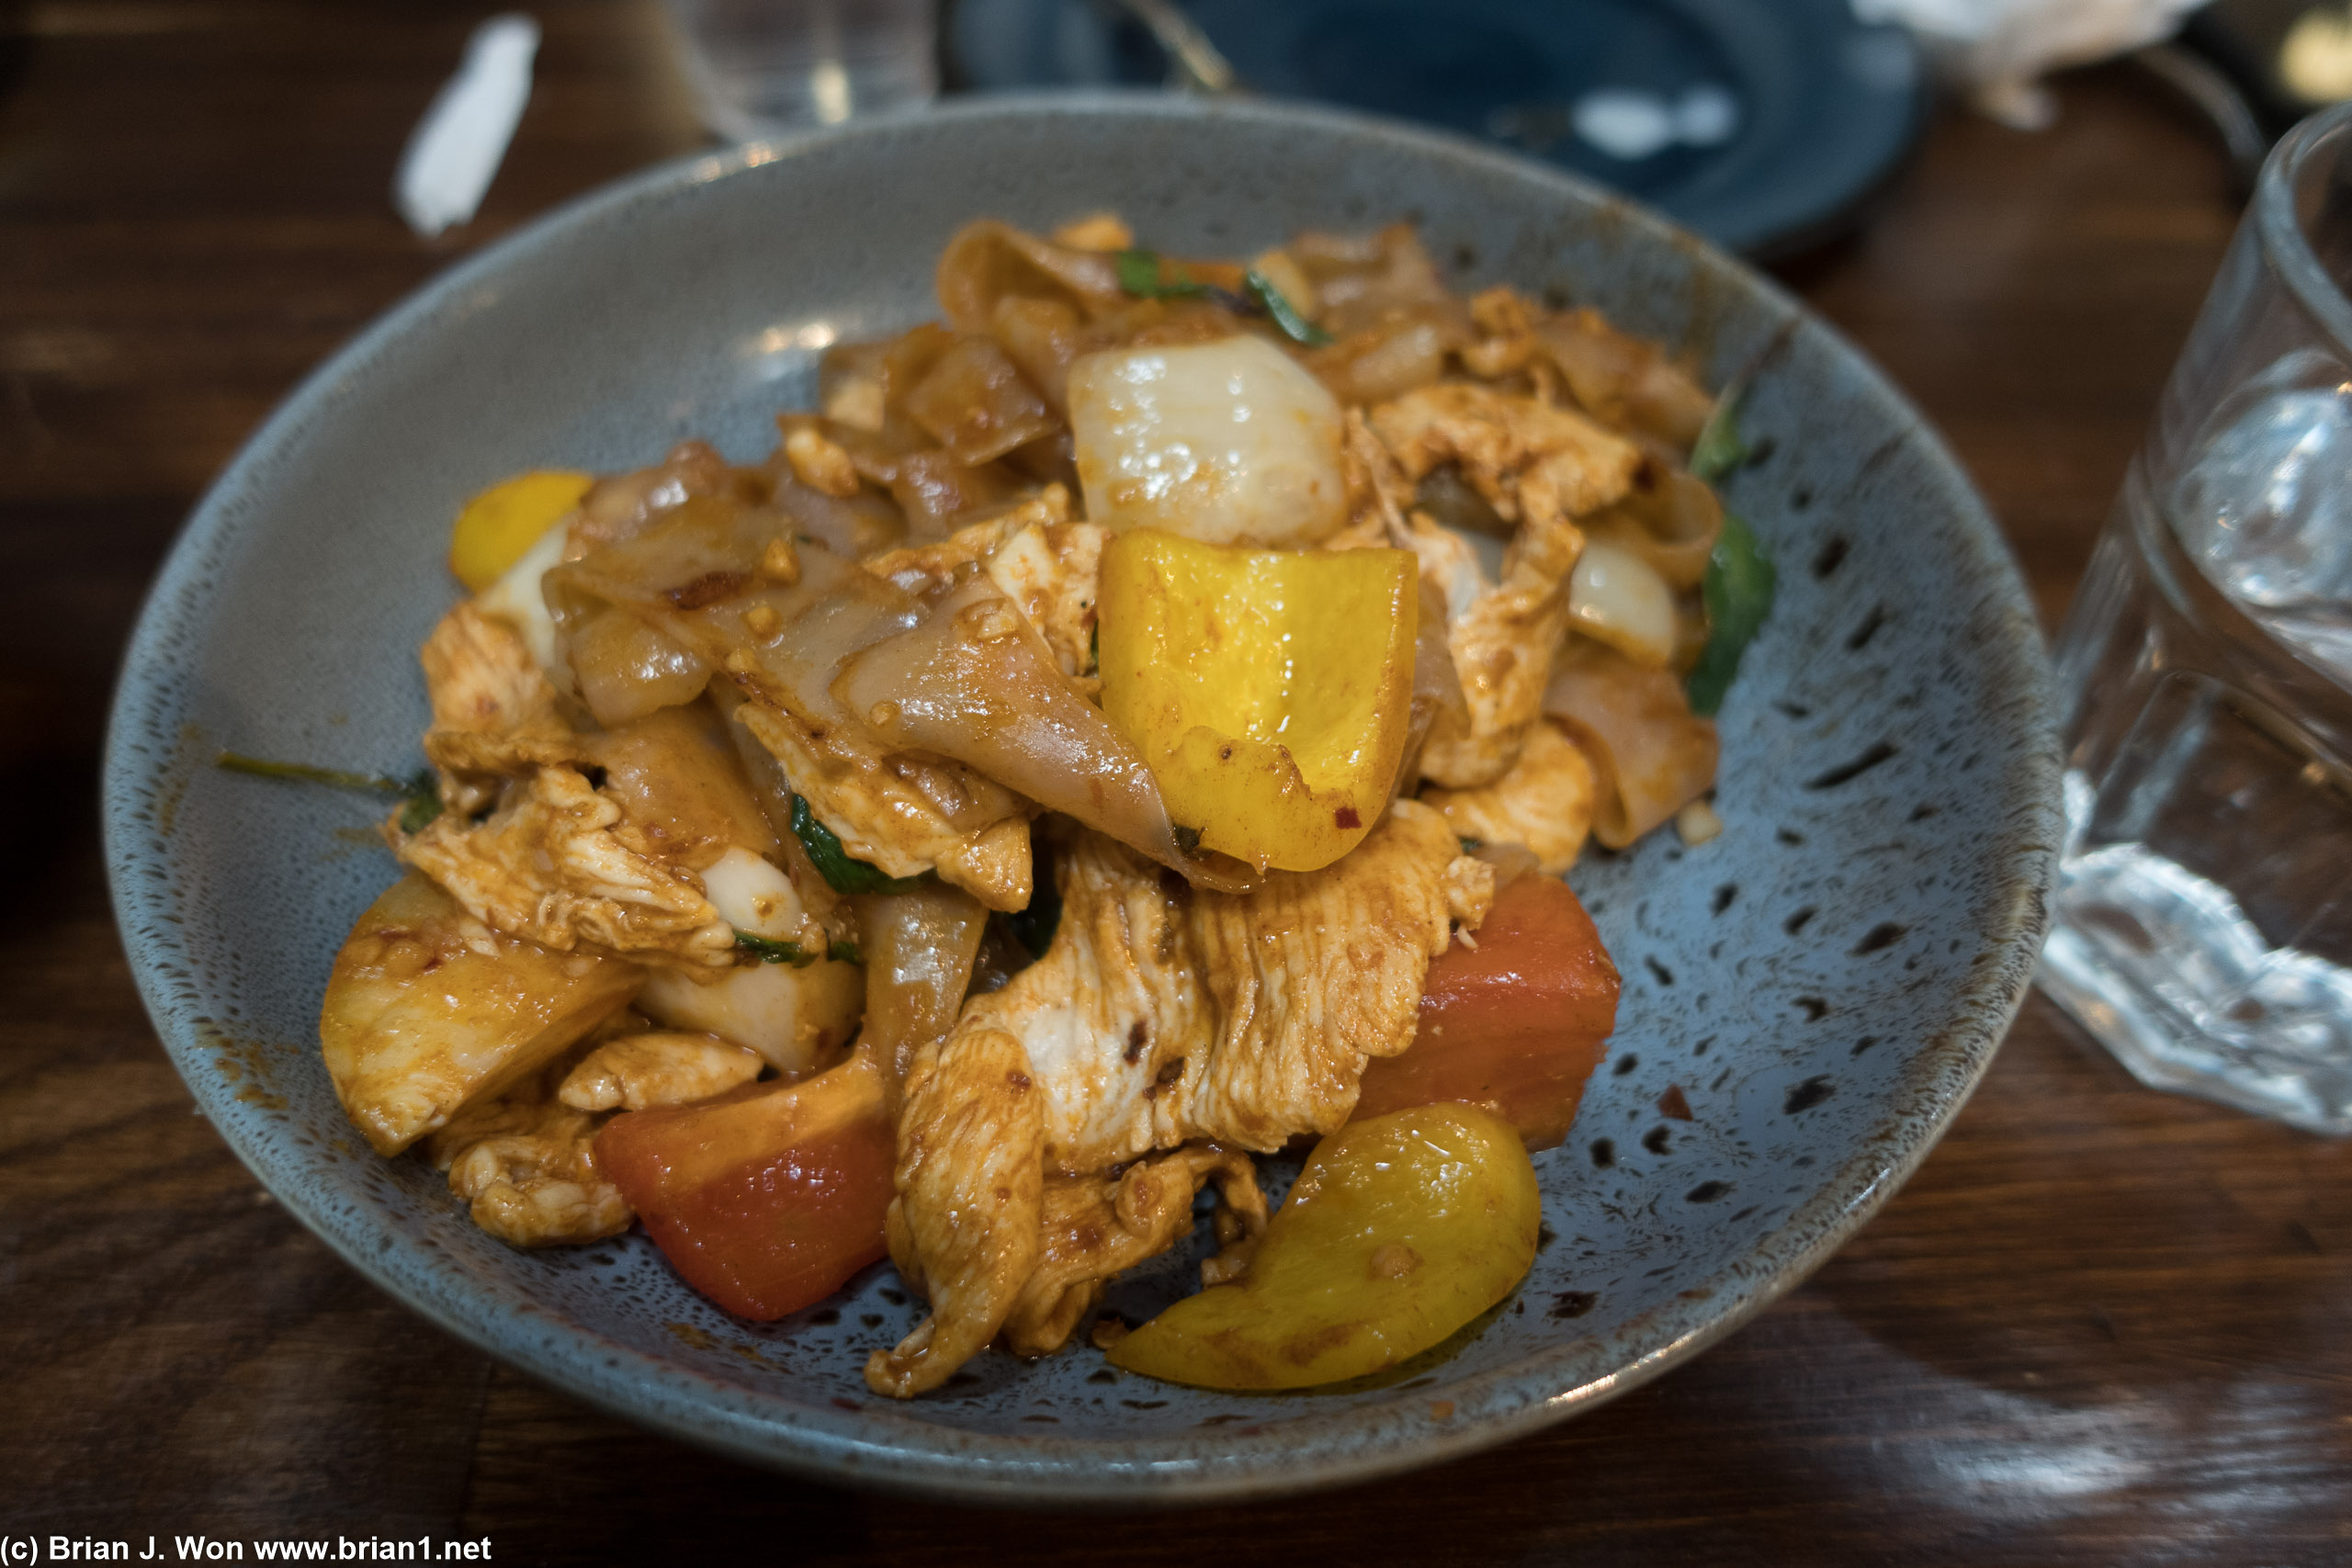 Pad kee mao (drunken noodle) with chicken was excellent.